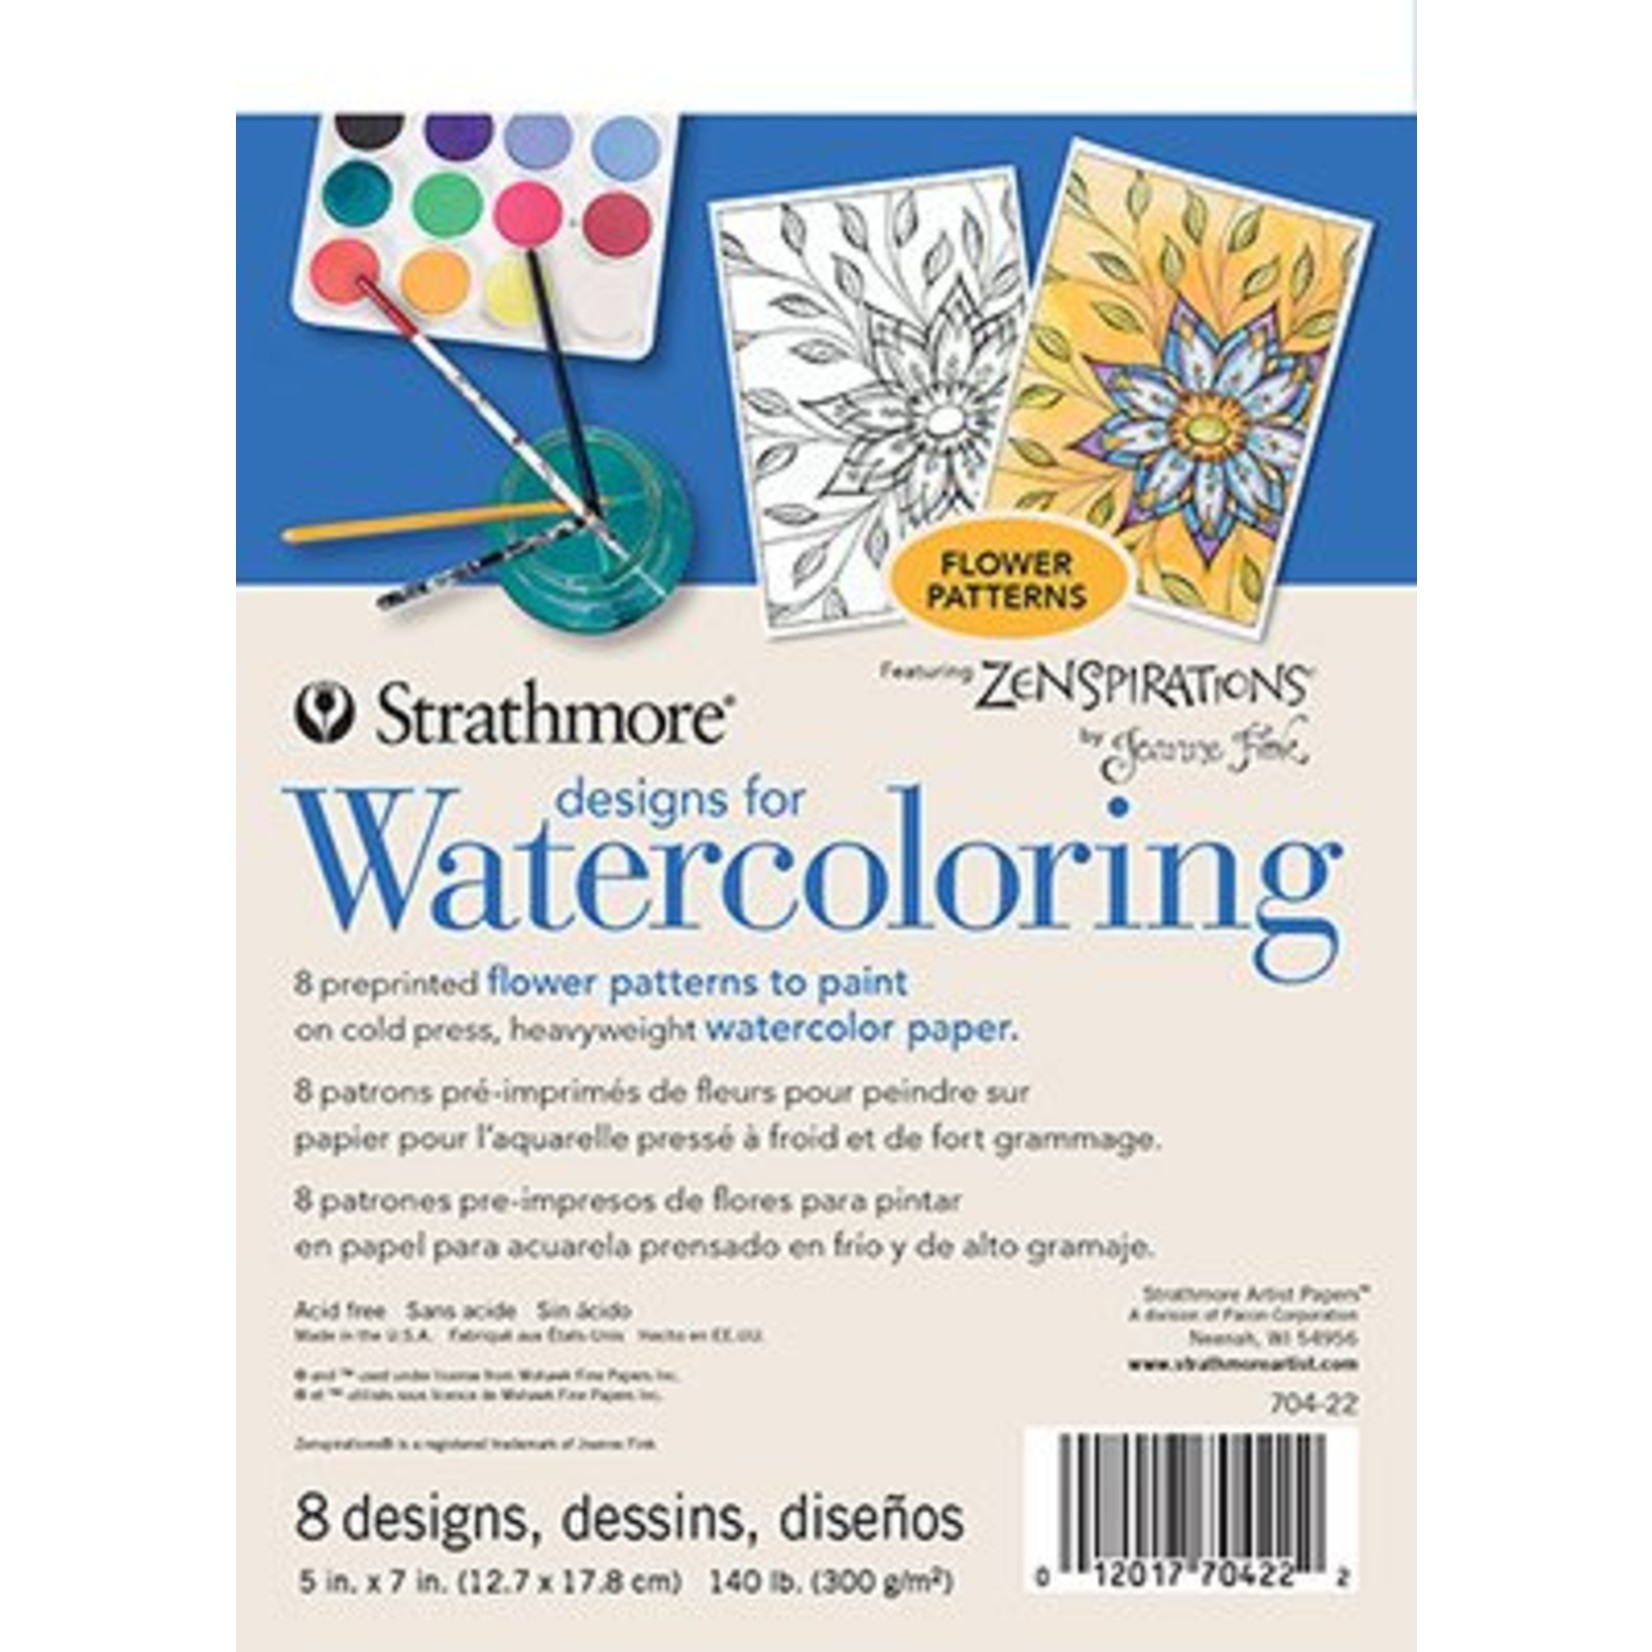 Strathmore Artist Papers 5" x 7" Flowers Designs for Watercoloring 8 Design Pad